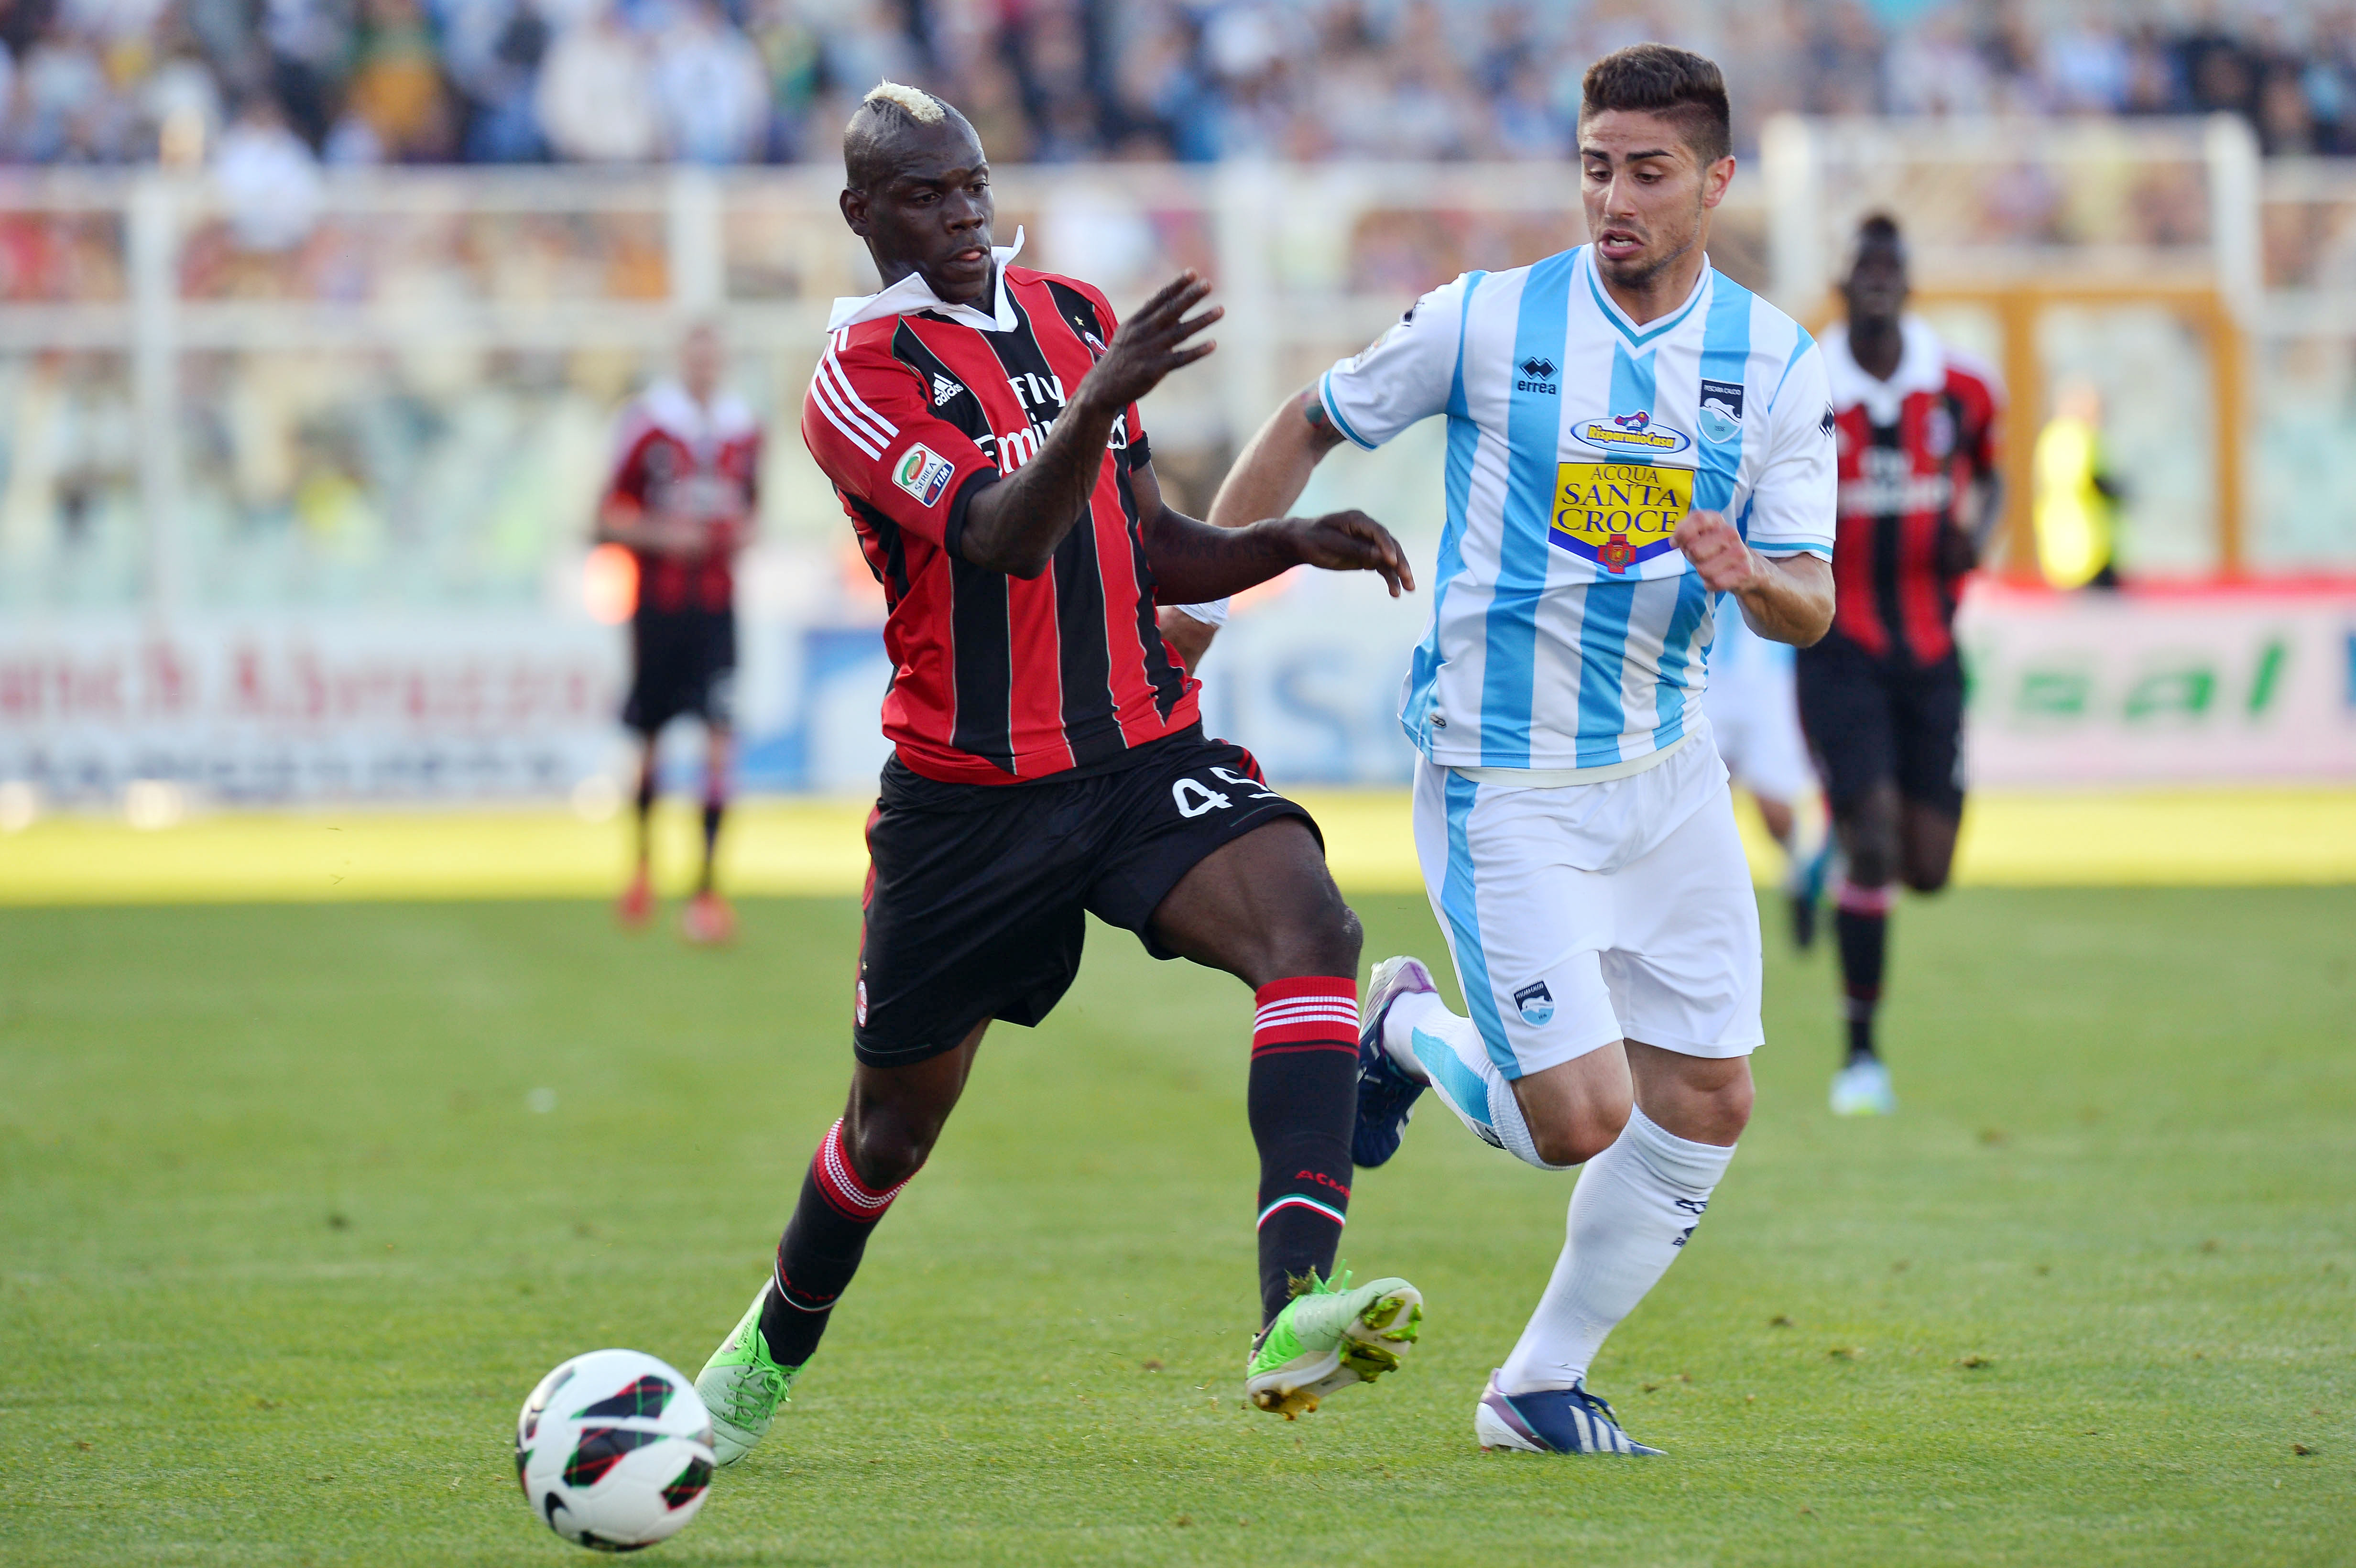 AC Milan's striker Mario Balotelli (L) vies with Pescara's Marco Capuano (R) during an Italian Serie A football match at the Adriaticum stadium in Pescara on May 8, 2013. AFP PHOTO / VINCENZO PINTO (Photo credit should read VINCENZO PINTO/AFP/Getty Images)